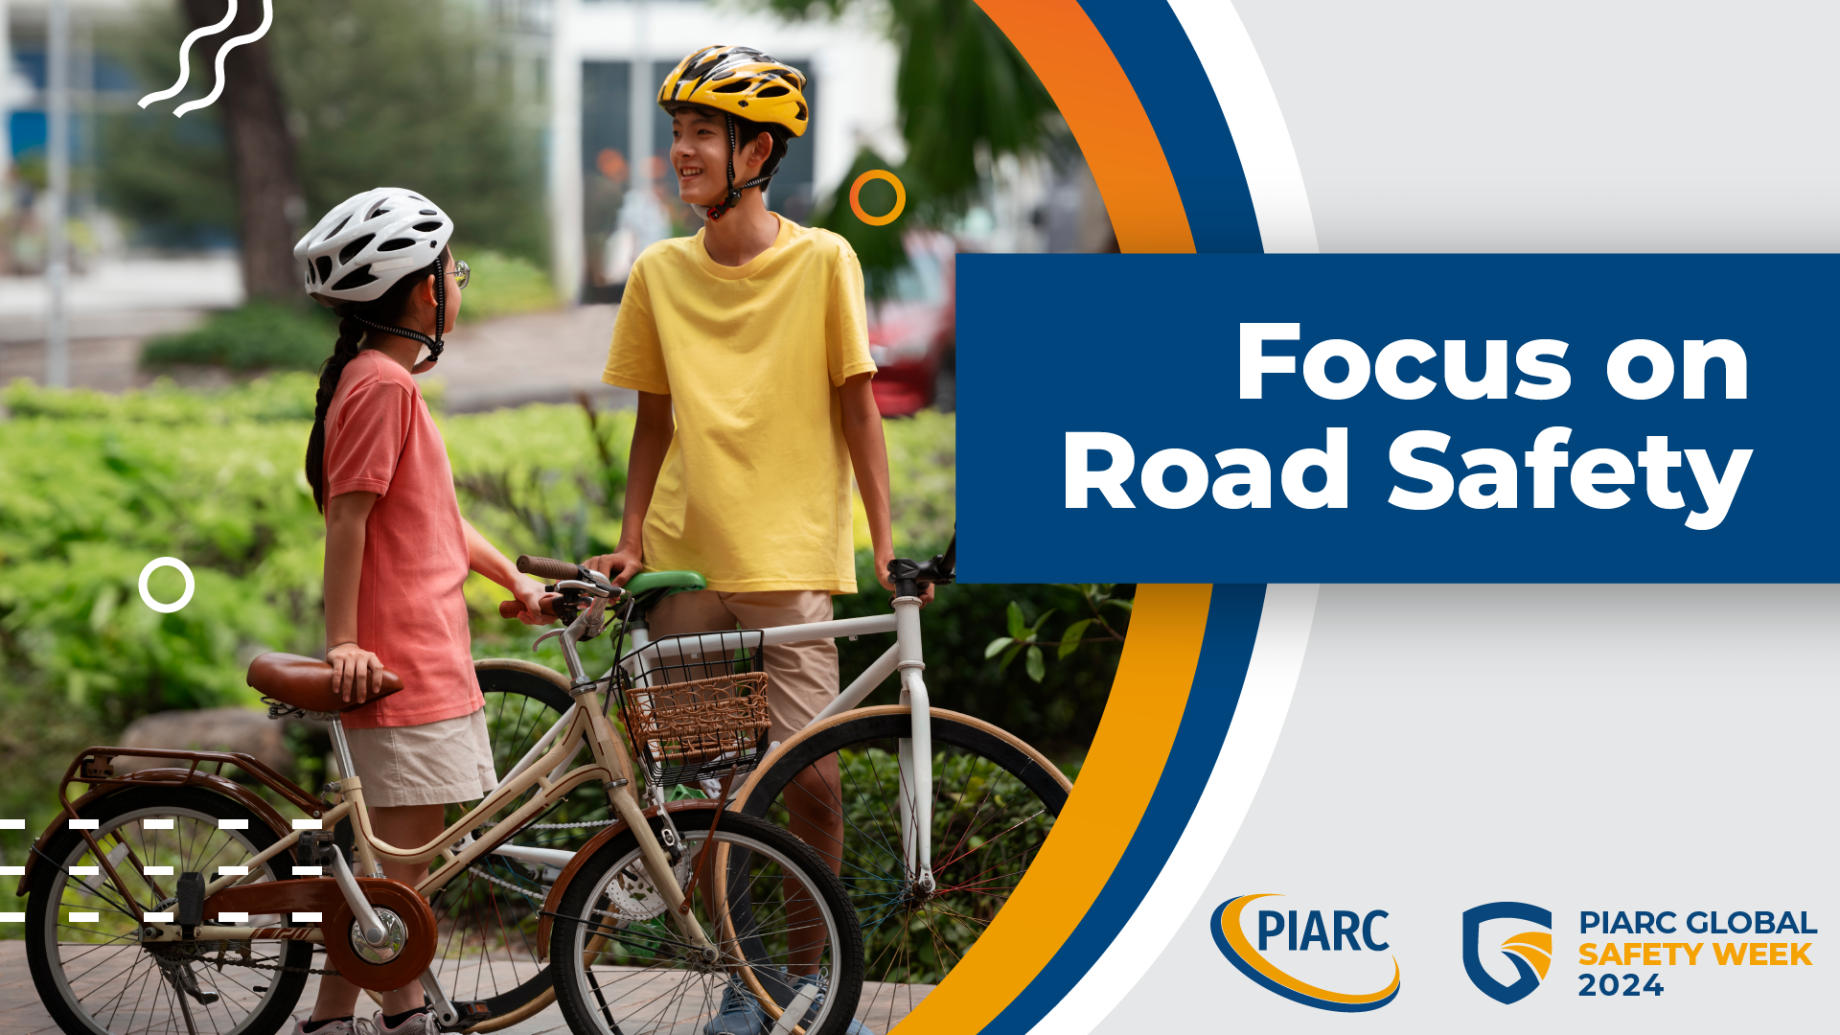 PIARC's ongoing commitment to road safety: building safer roads worldwide